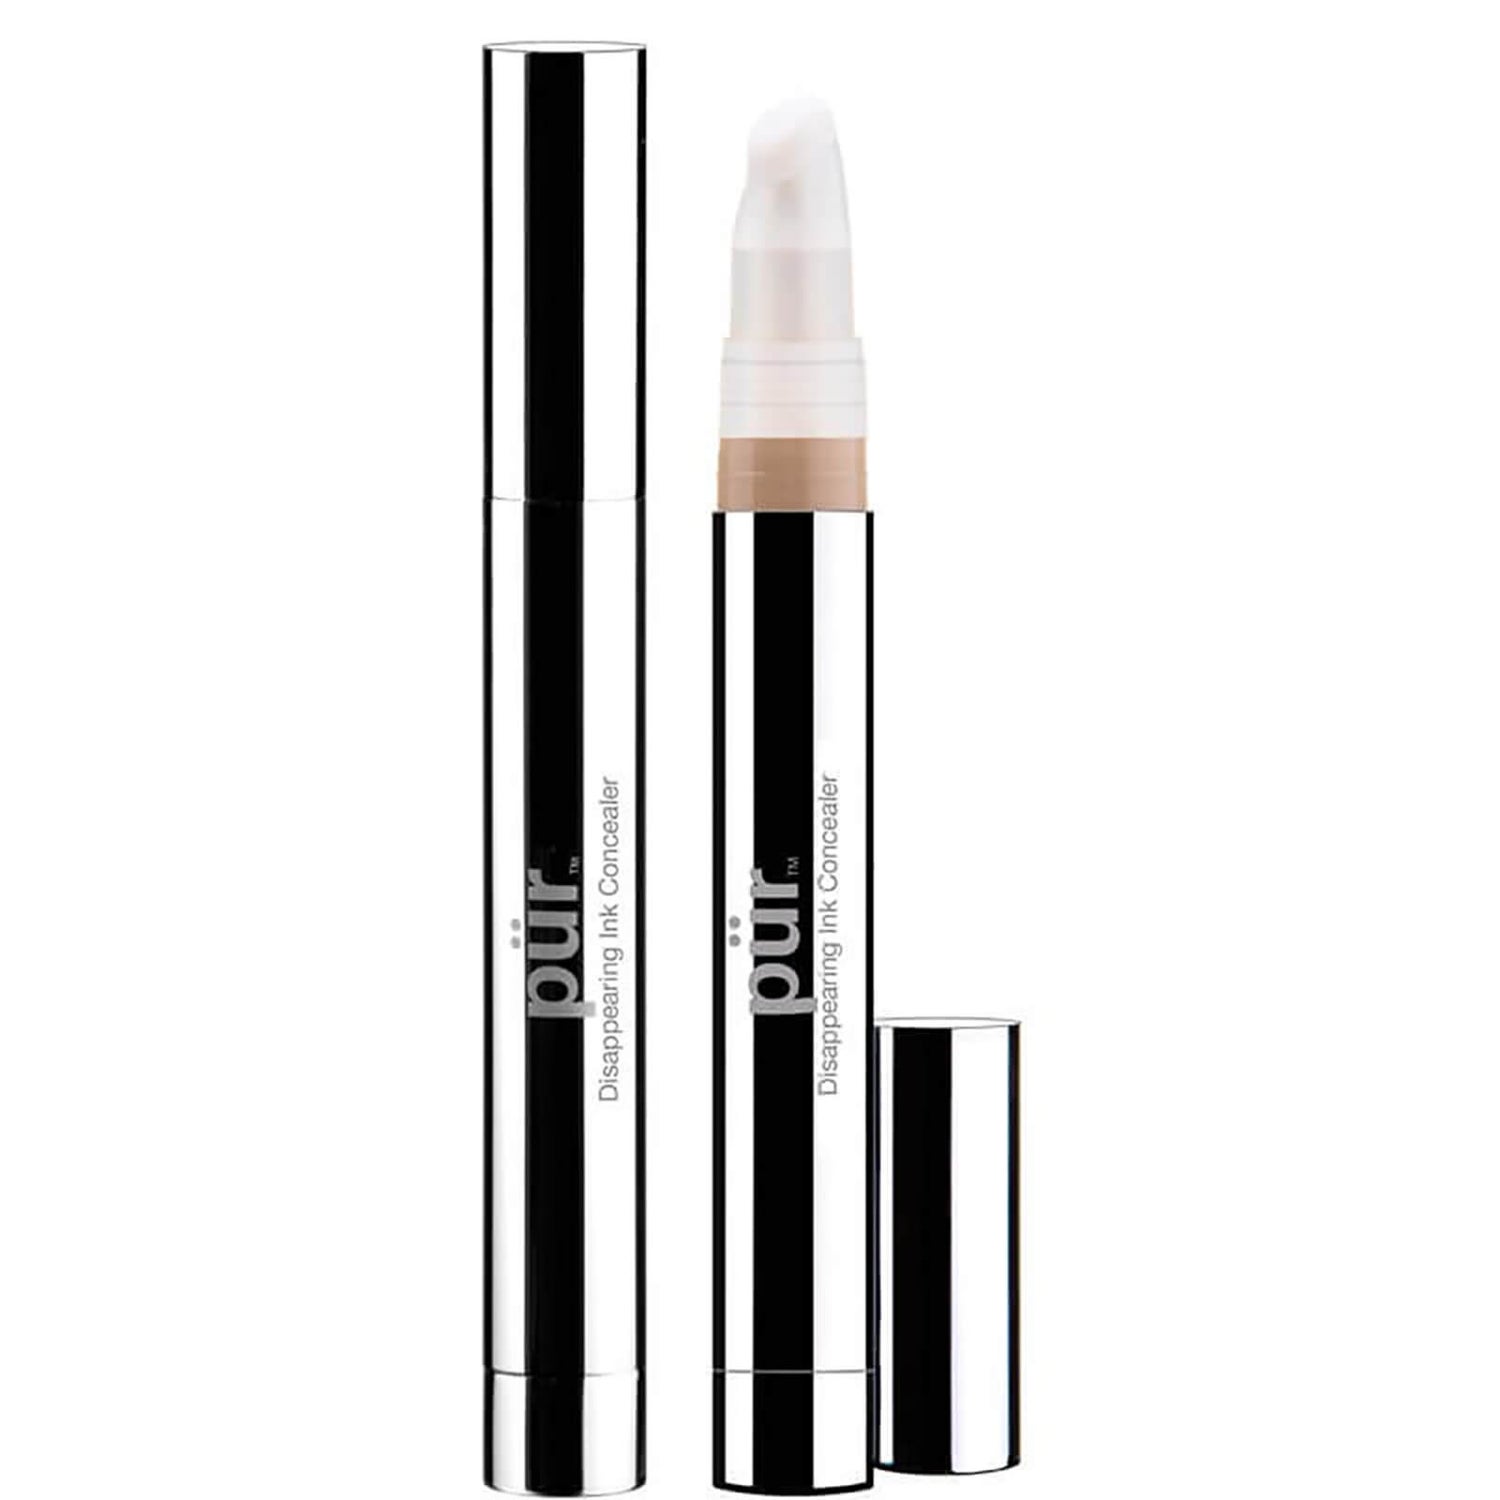 PUR Summer Collection Disappearing Ink Concealer.